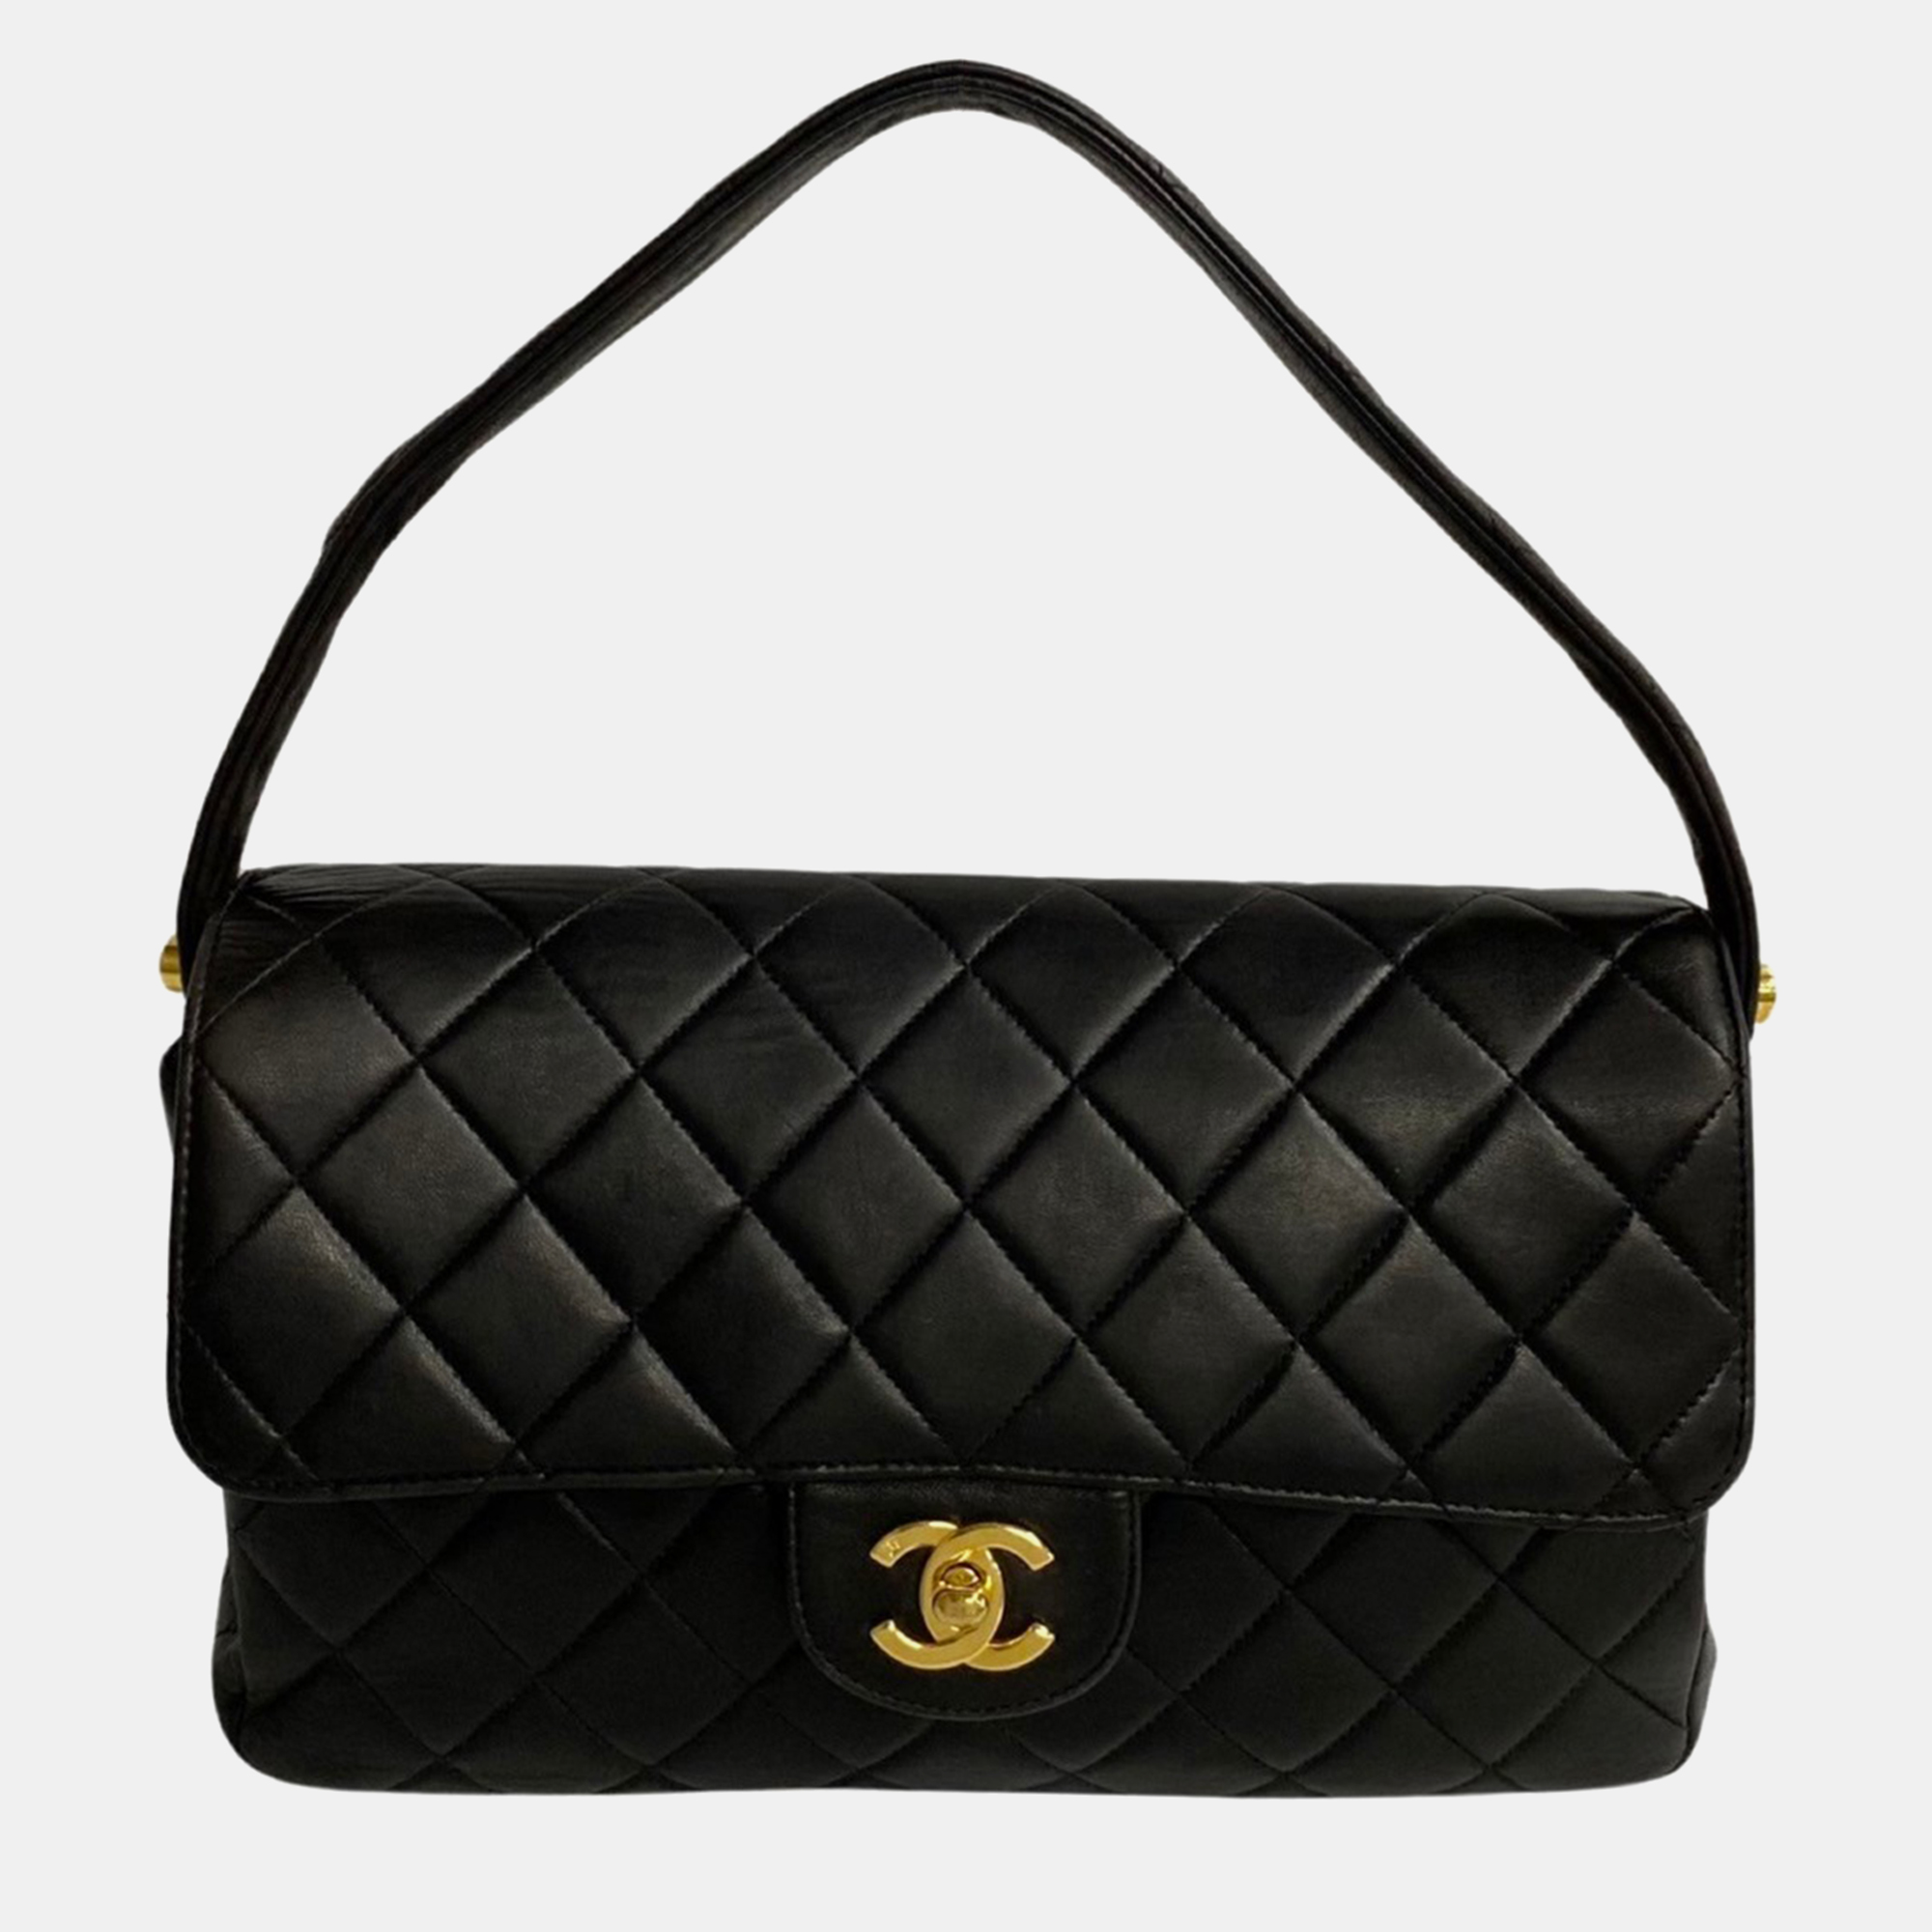 Chanel black leather quilted double sided flap bag